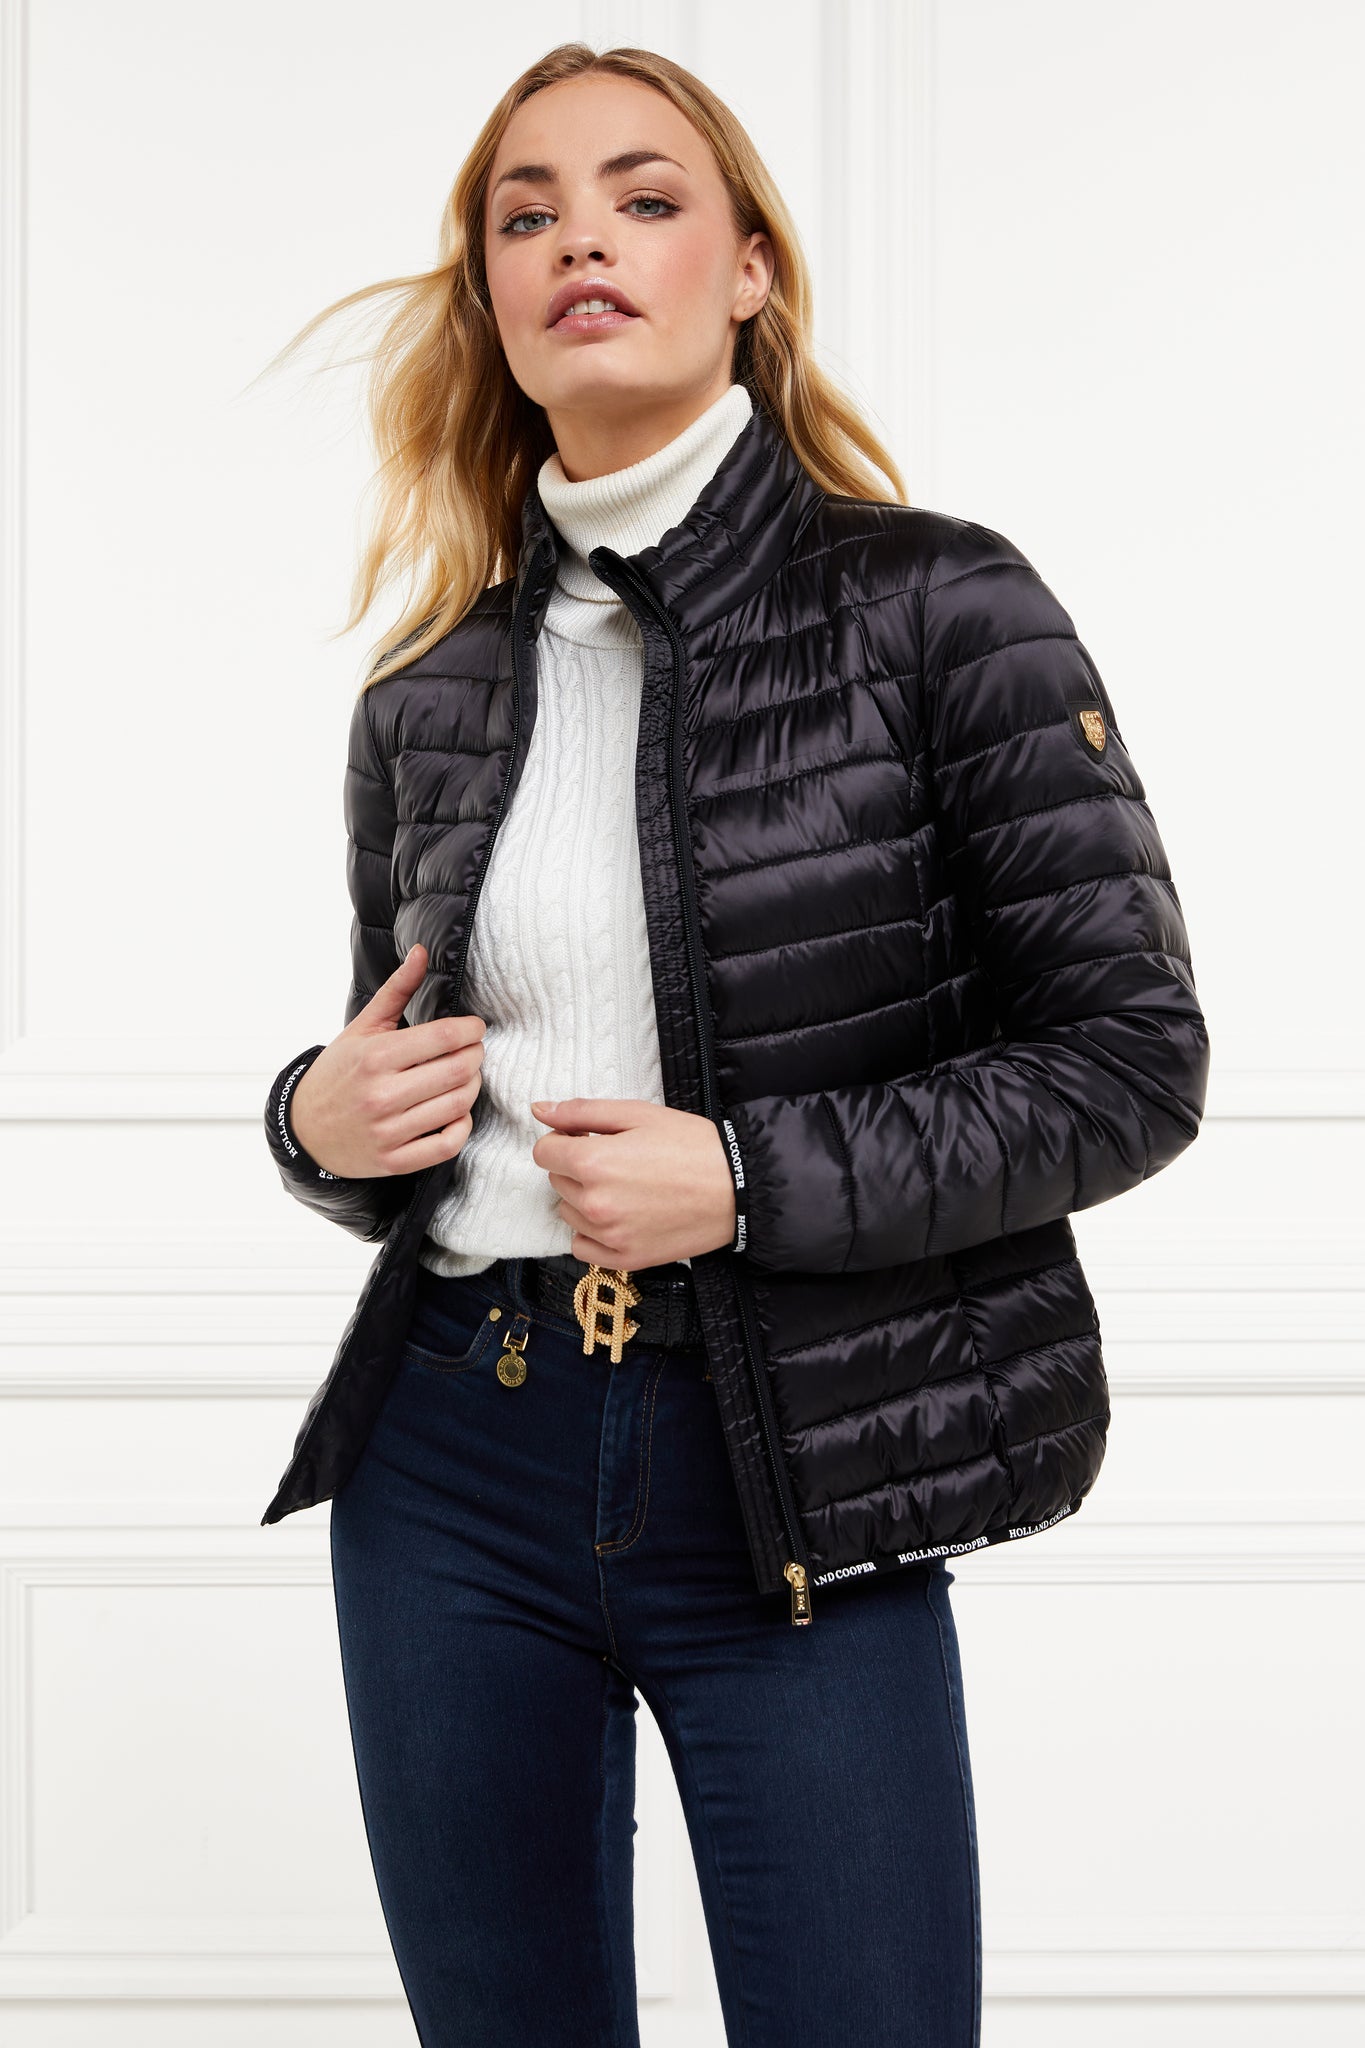 womens lightweight hoodless padded black jacket with embroidery detail on back high neck and elasticated cuffs and hem. easily packs away into separate small bag of the same colour with handle 